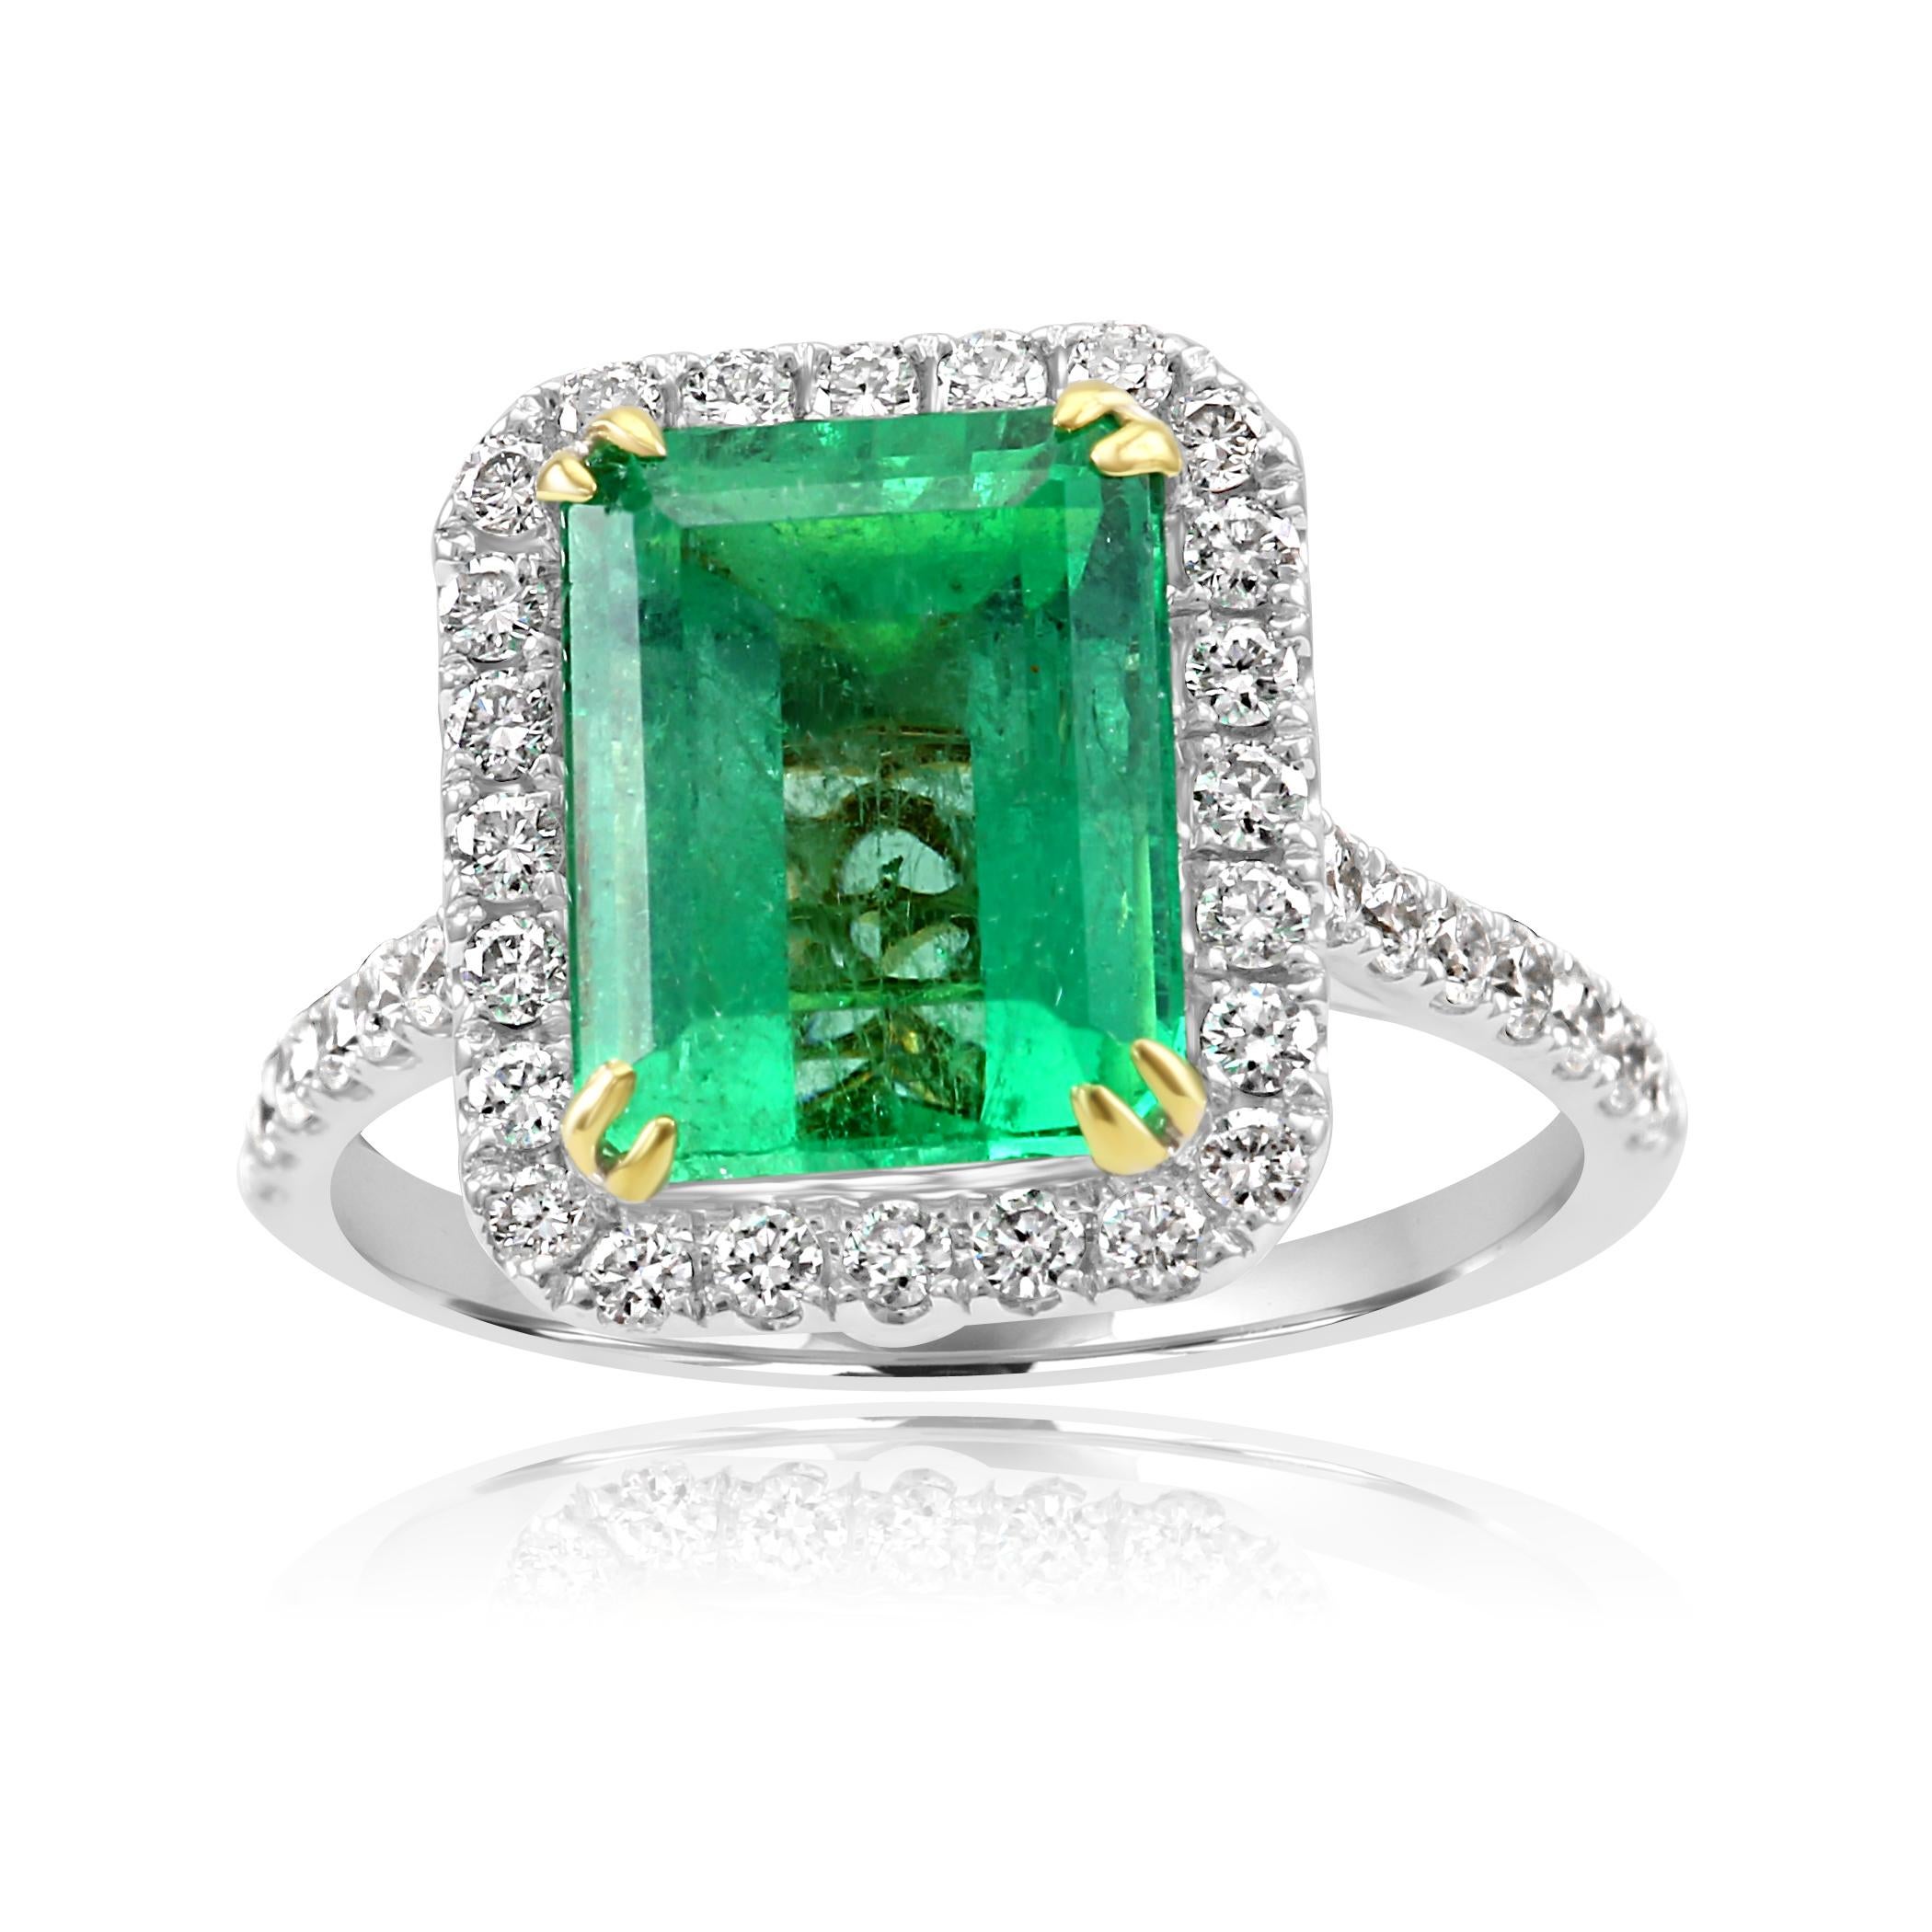 Colombian Emerald Emerald Cut 4.13 Carat encircled in a single Halo of 44 White Colorless VS-SI Diamond Rounds 0.68 Carat Set in a very Beautiful and intricately made 18K White and Yellow Gold Bridal Fashion Cocktail Ring.

Style available in